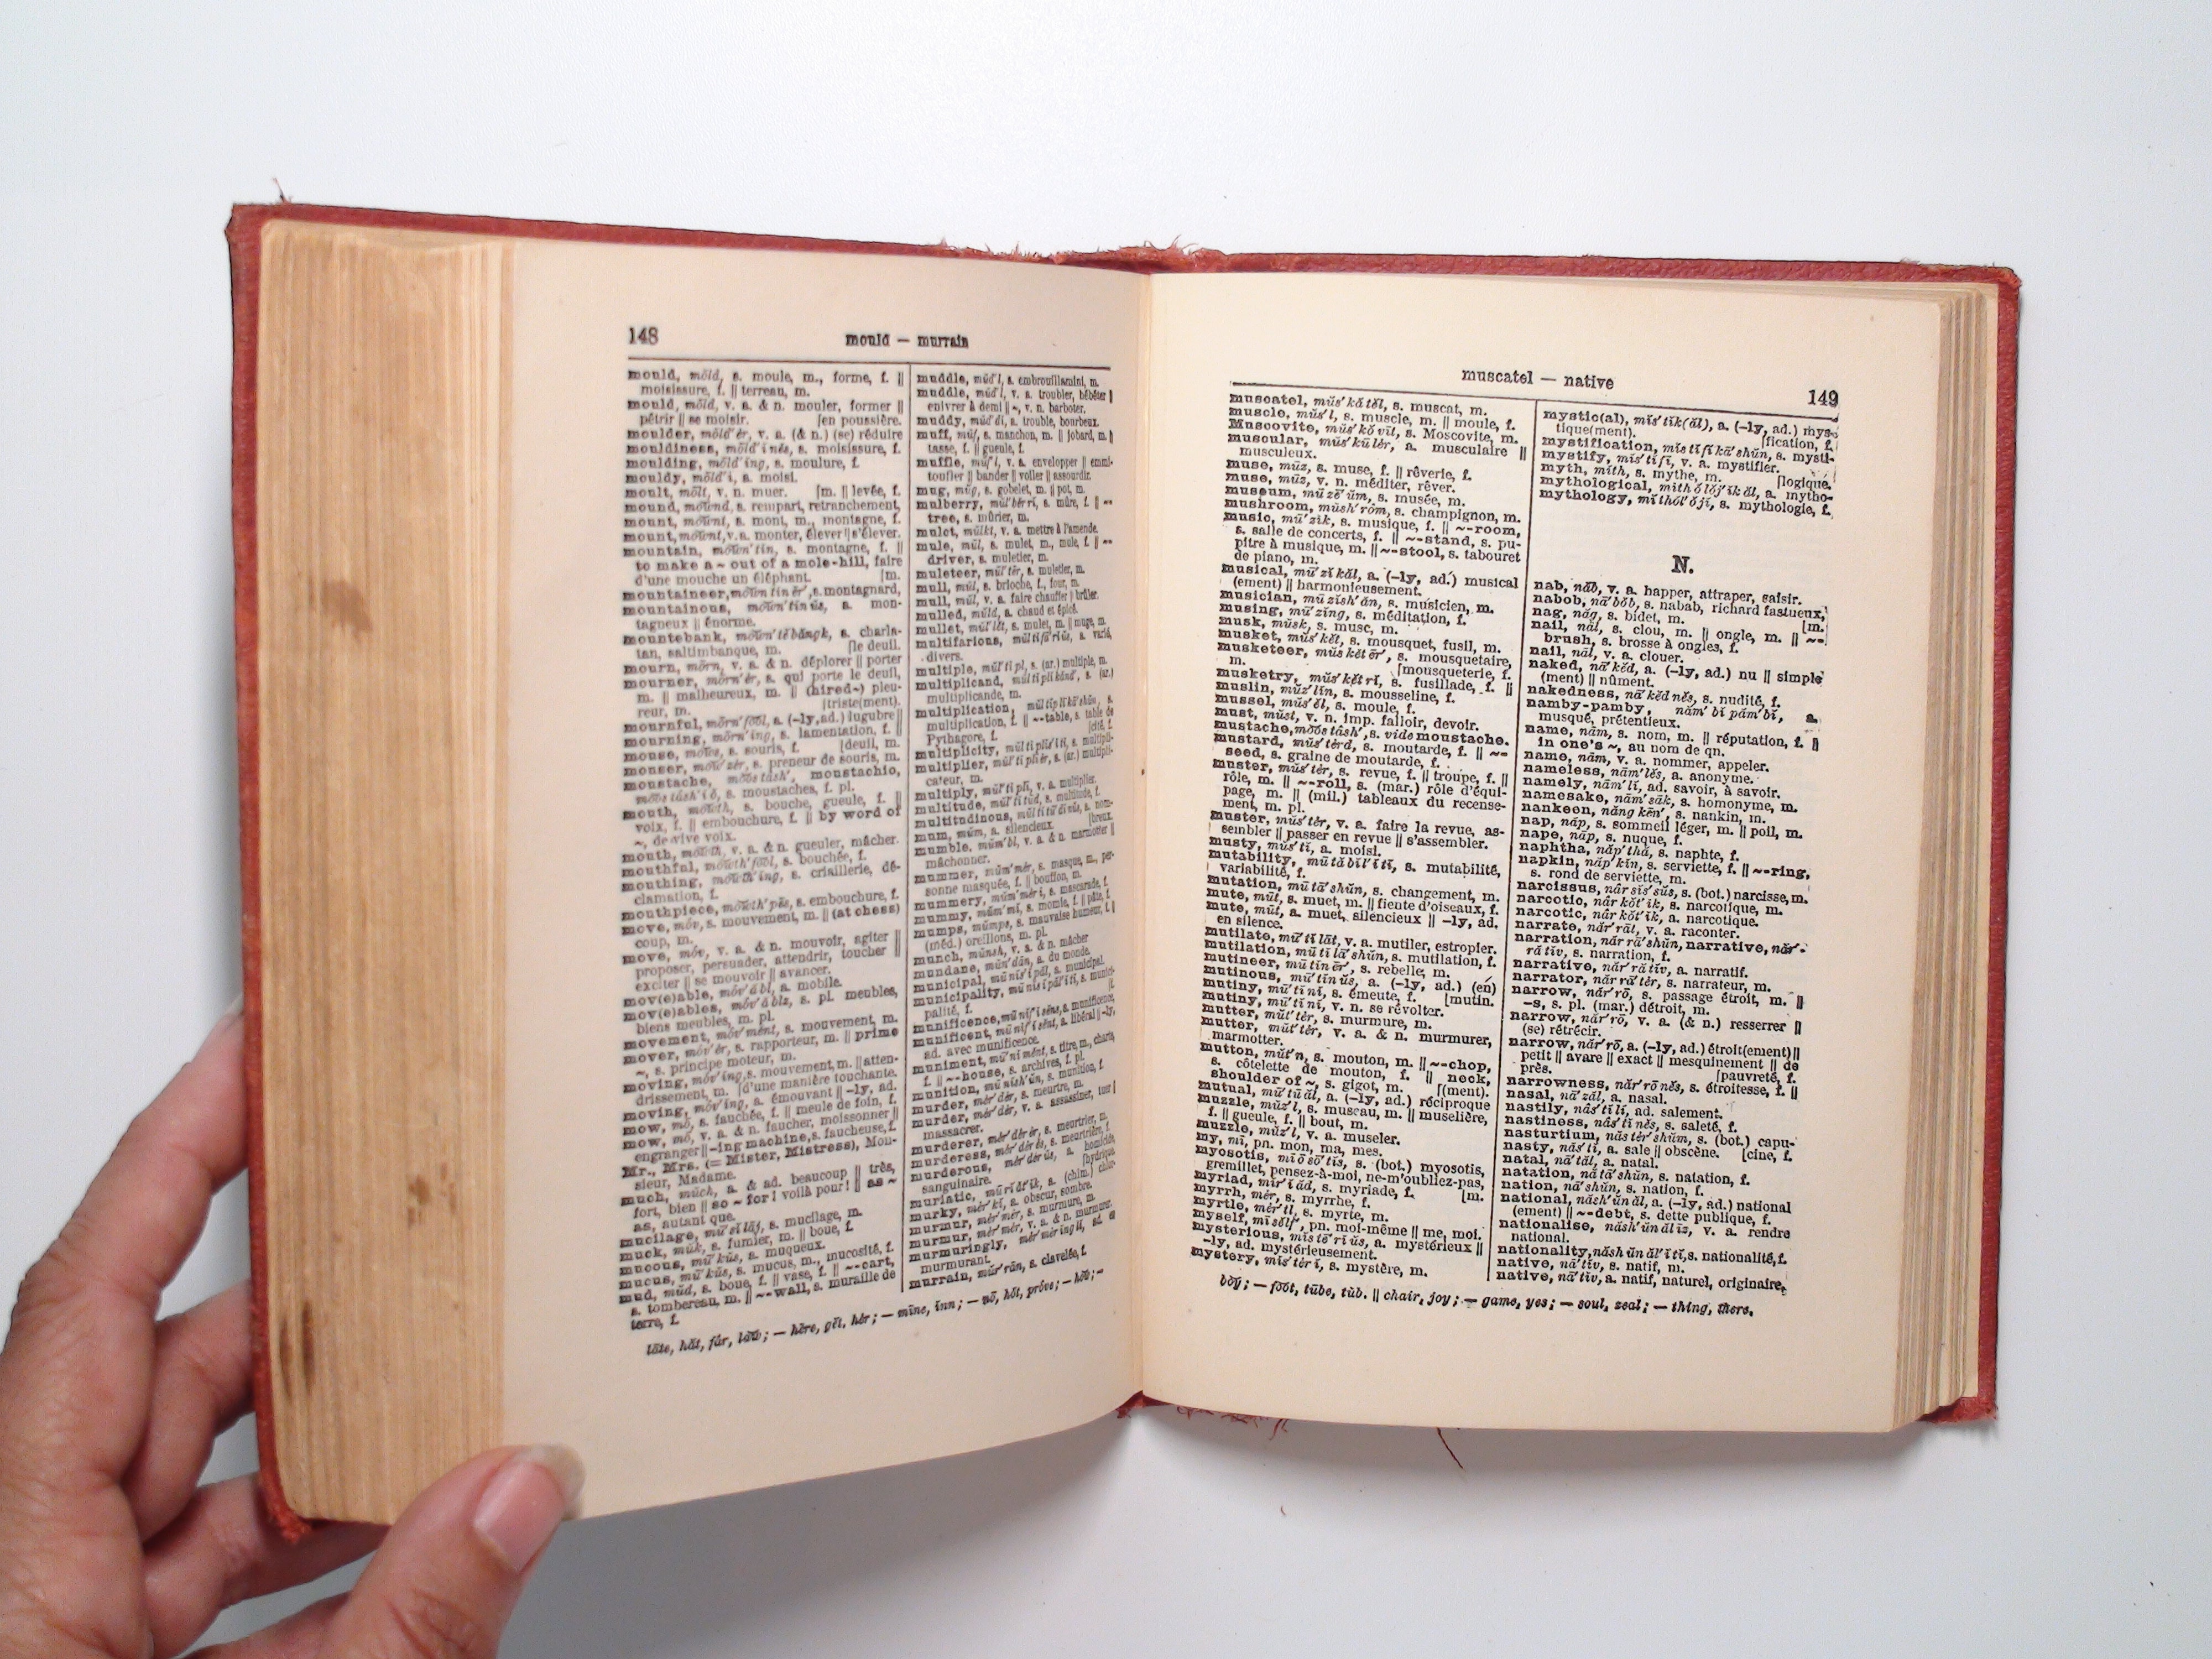 Junior Classic French Dictionary by J. E. Wessely, Rev. Ed, Follett, 1947